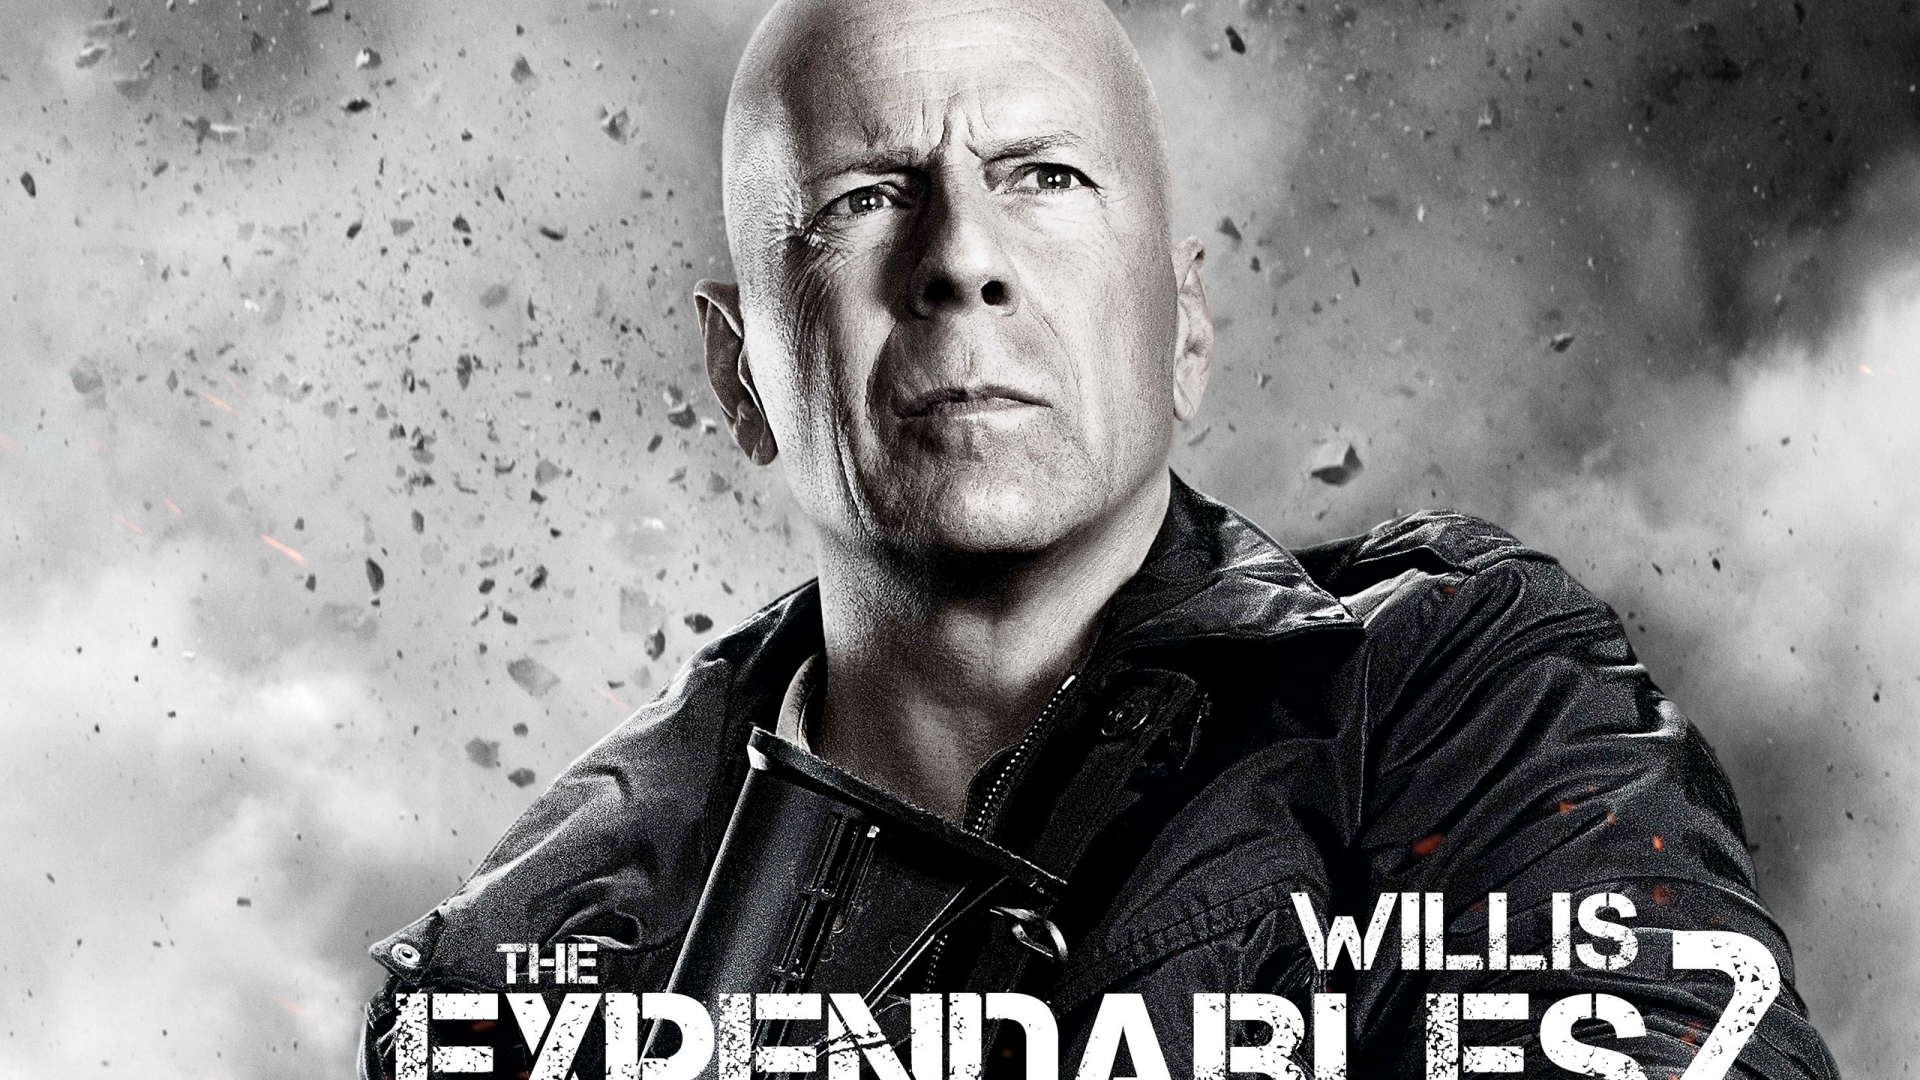 Bruce Willis Expendables 2 for 1920 x 1080 HDTV 1080p resolution